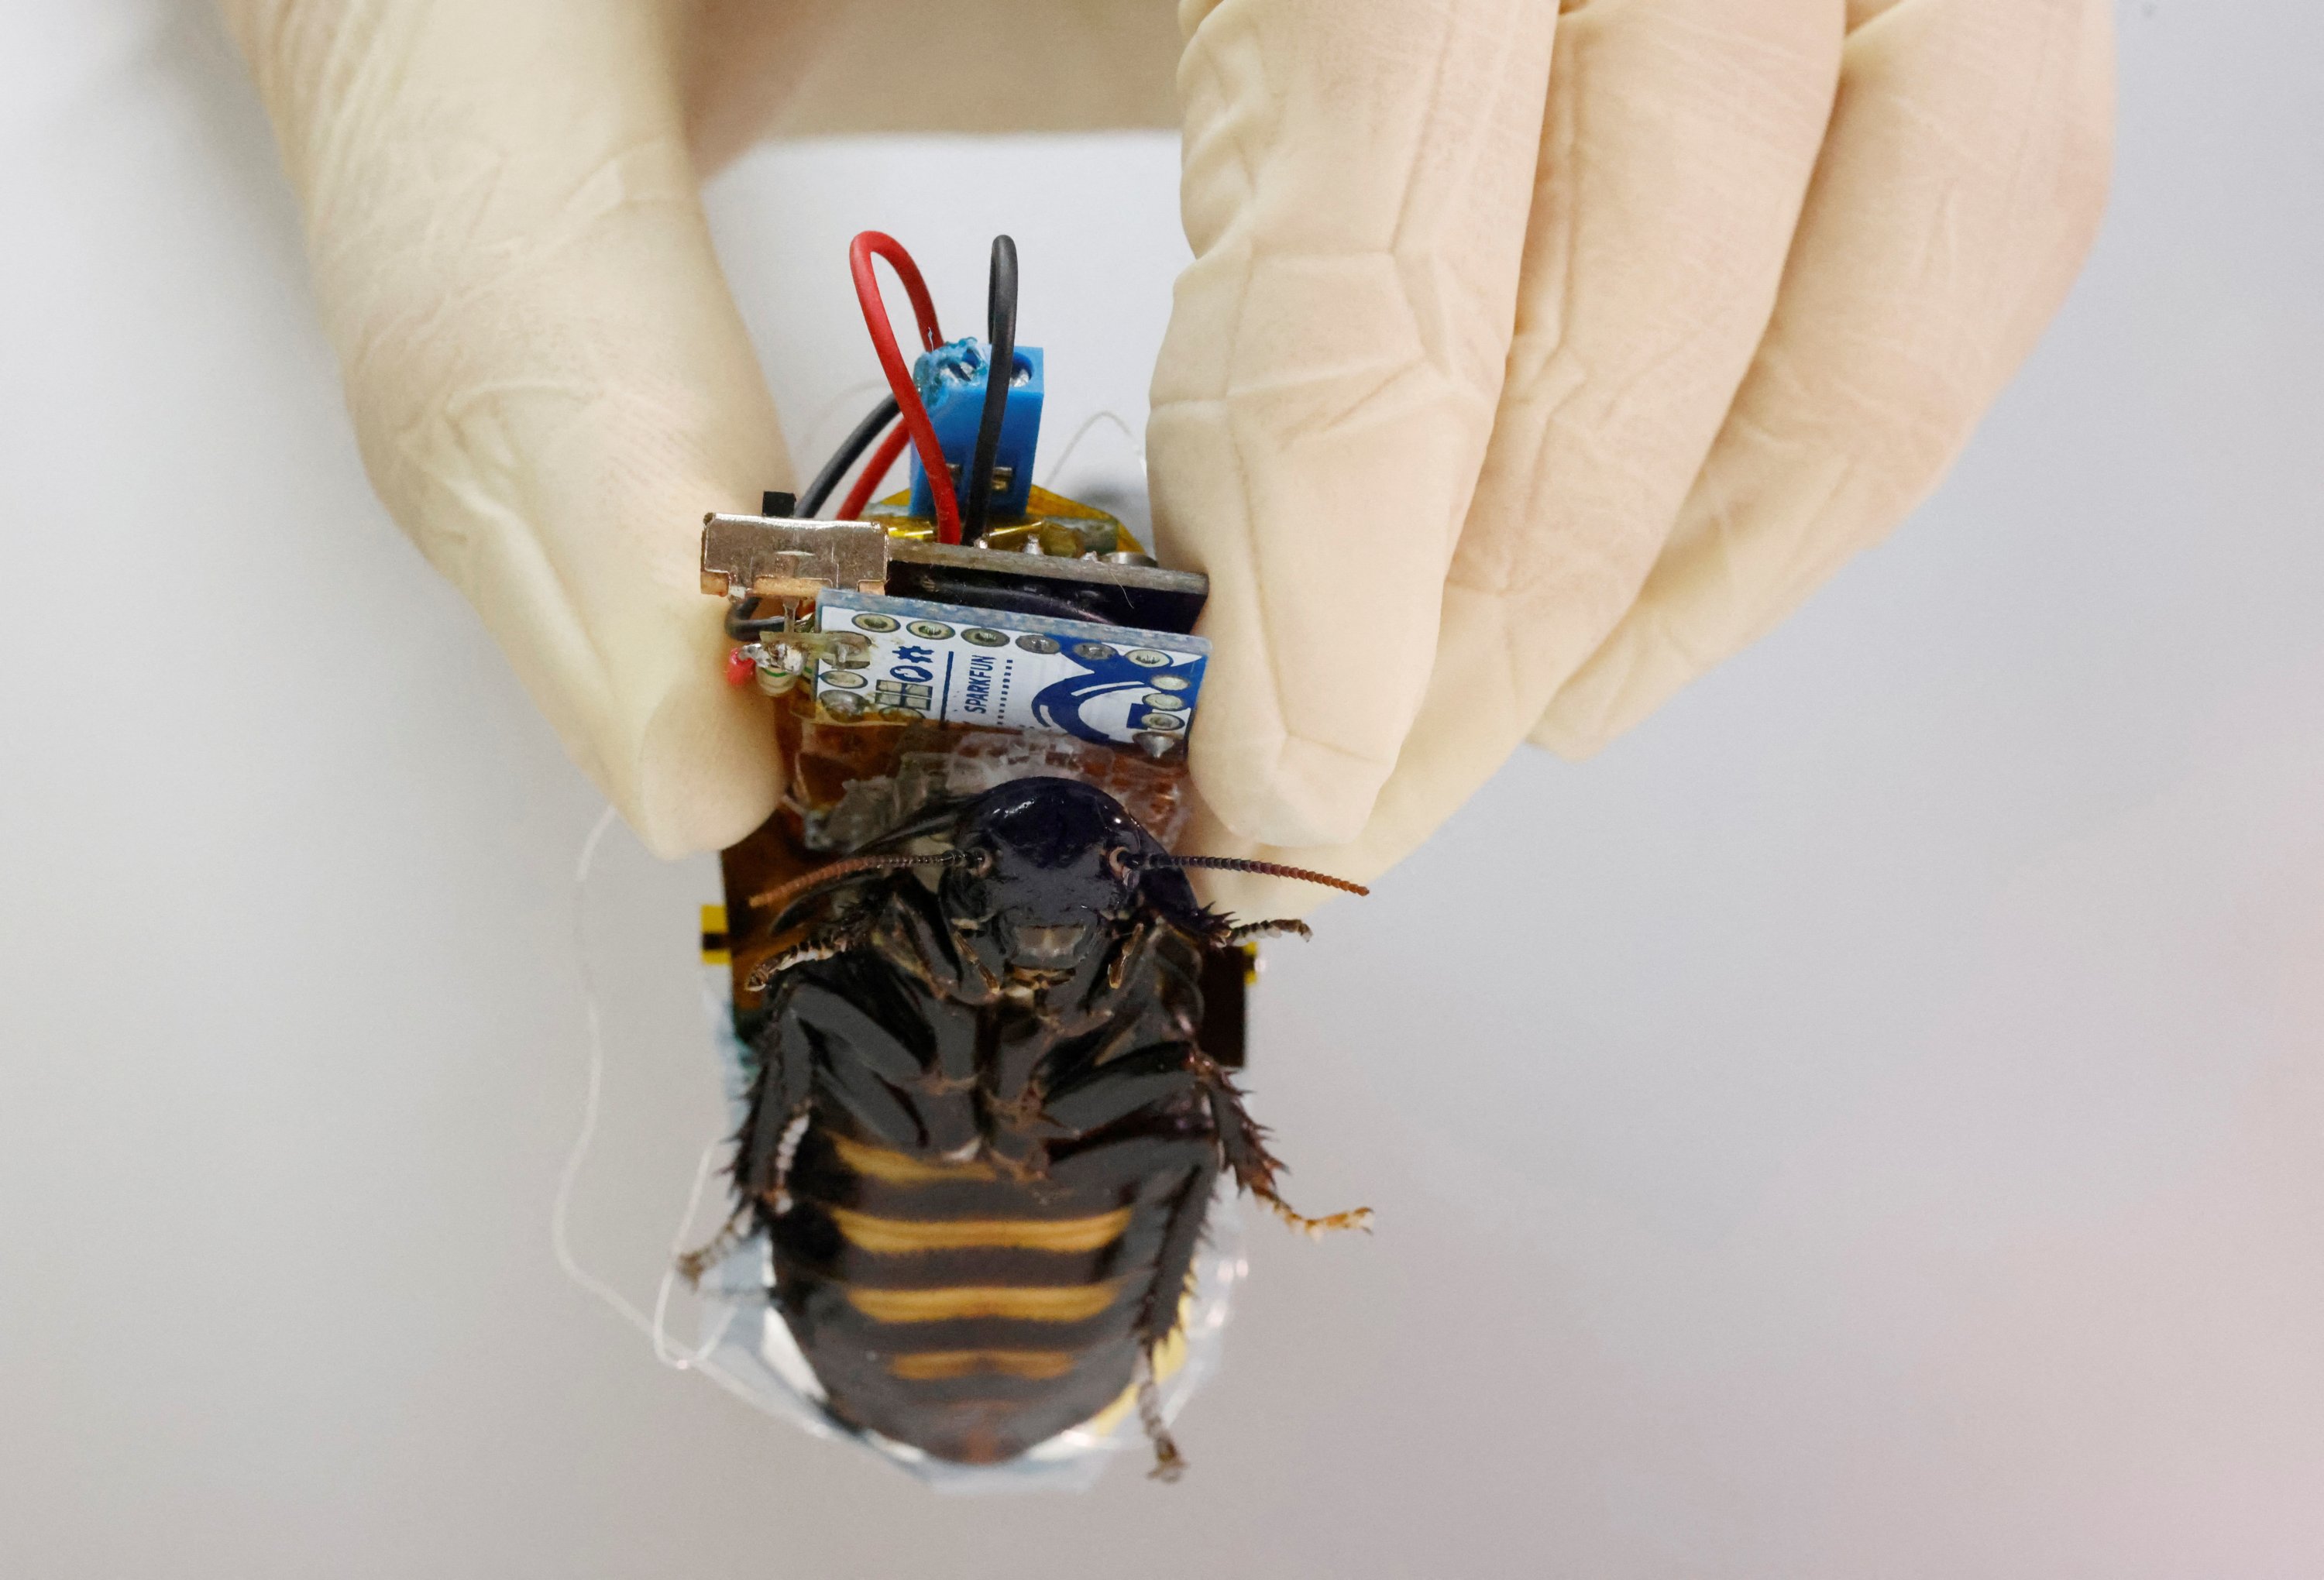 A researcher shows a Madagascar hissing cockroach, mounted with a 